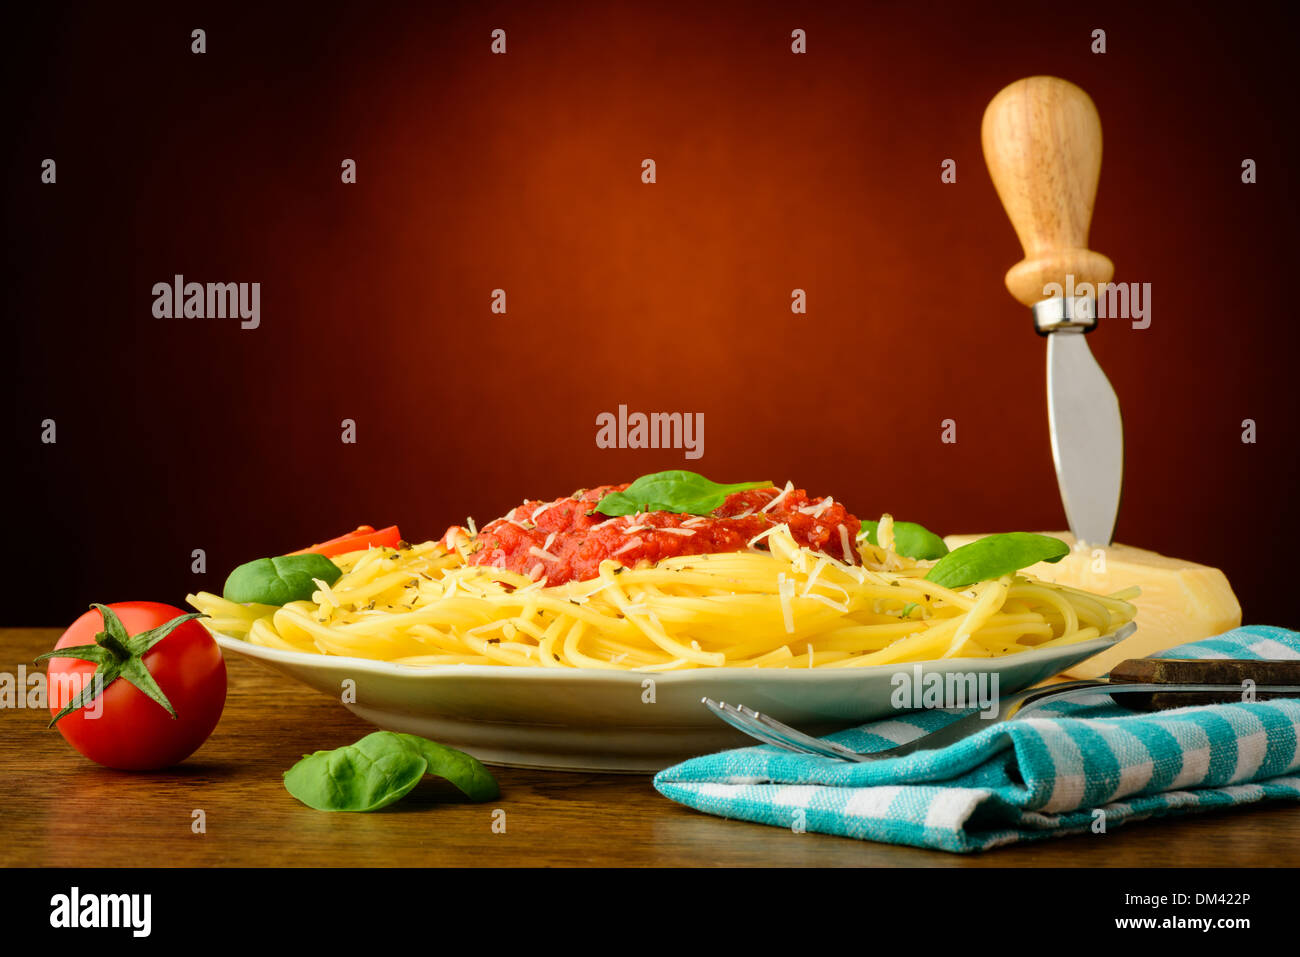 still life with traditional spaghetti pasta on a plate Stock Photo